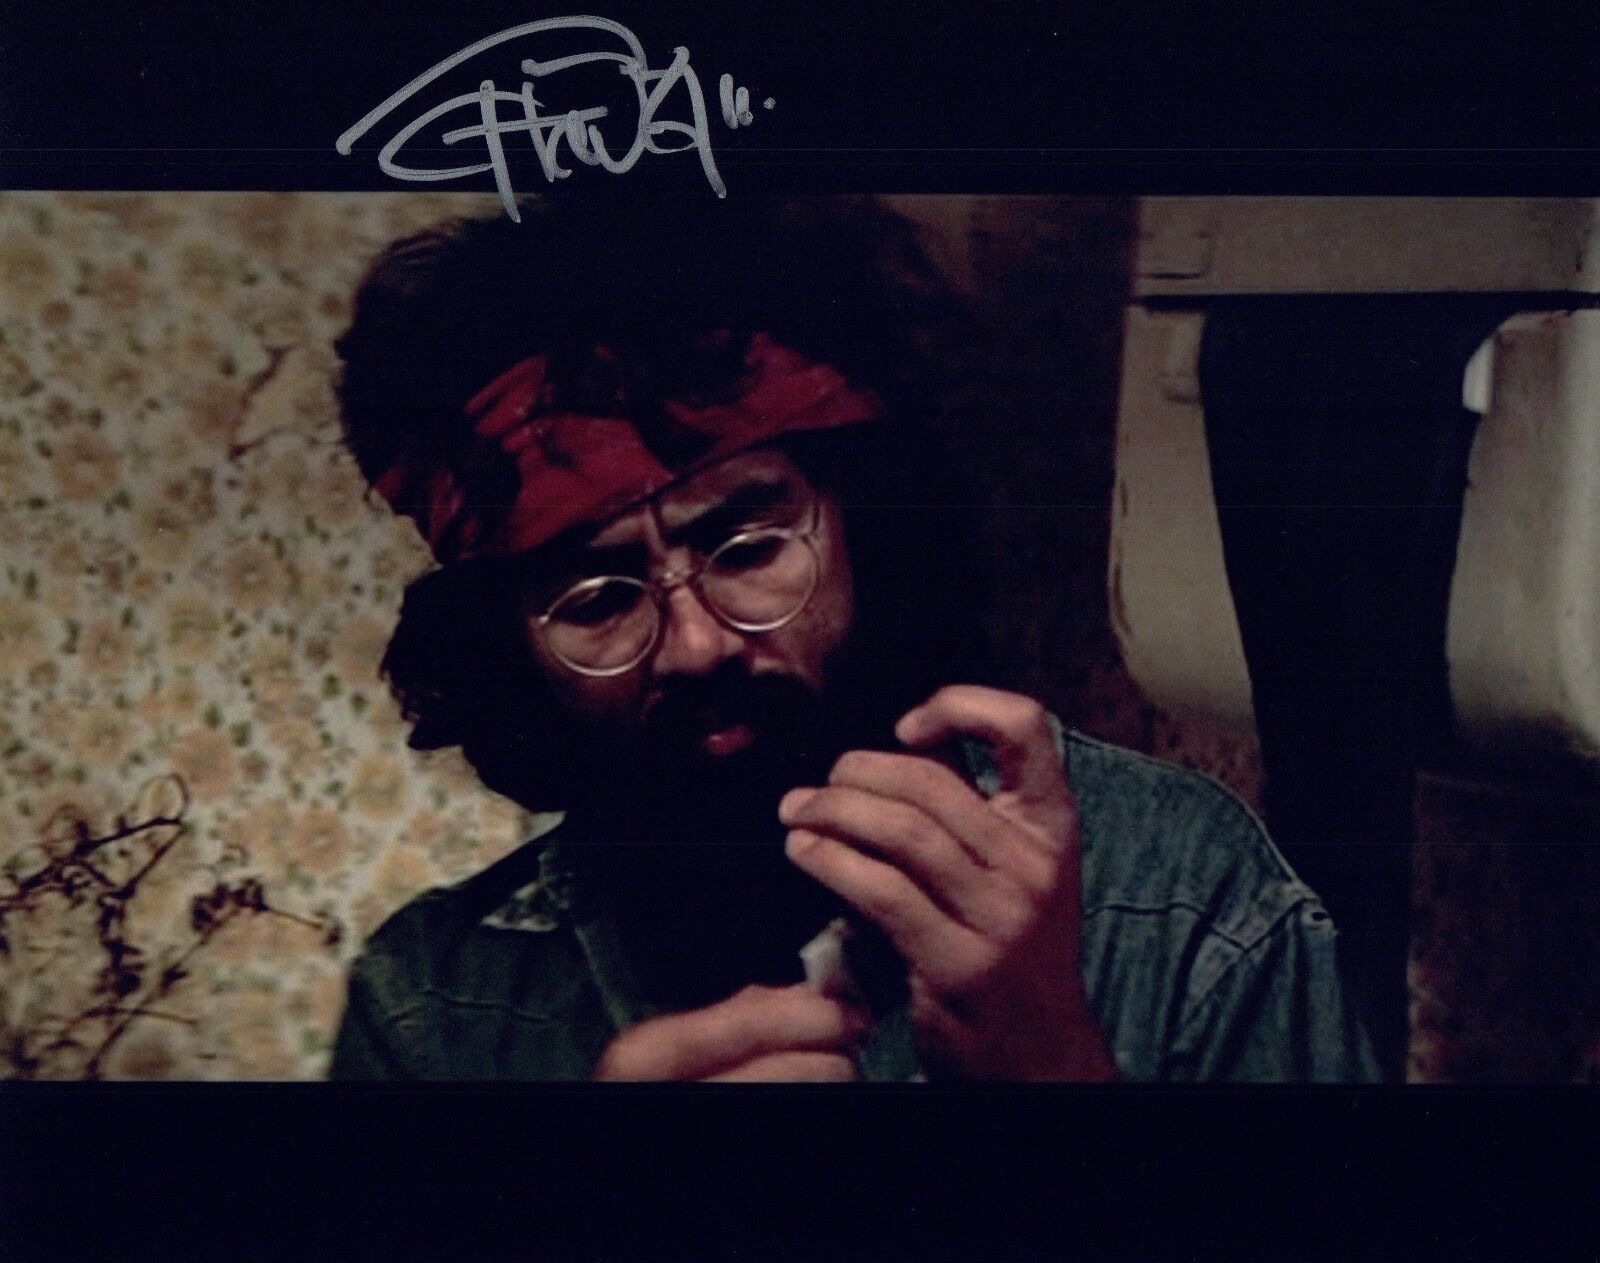 Tommy Chong Signed Autograph 8x10 Photo Poster painting Cheech & Chong UP IN SMOKE Scene COA